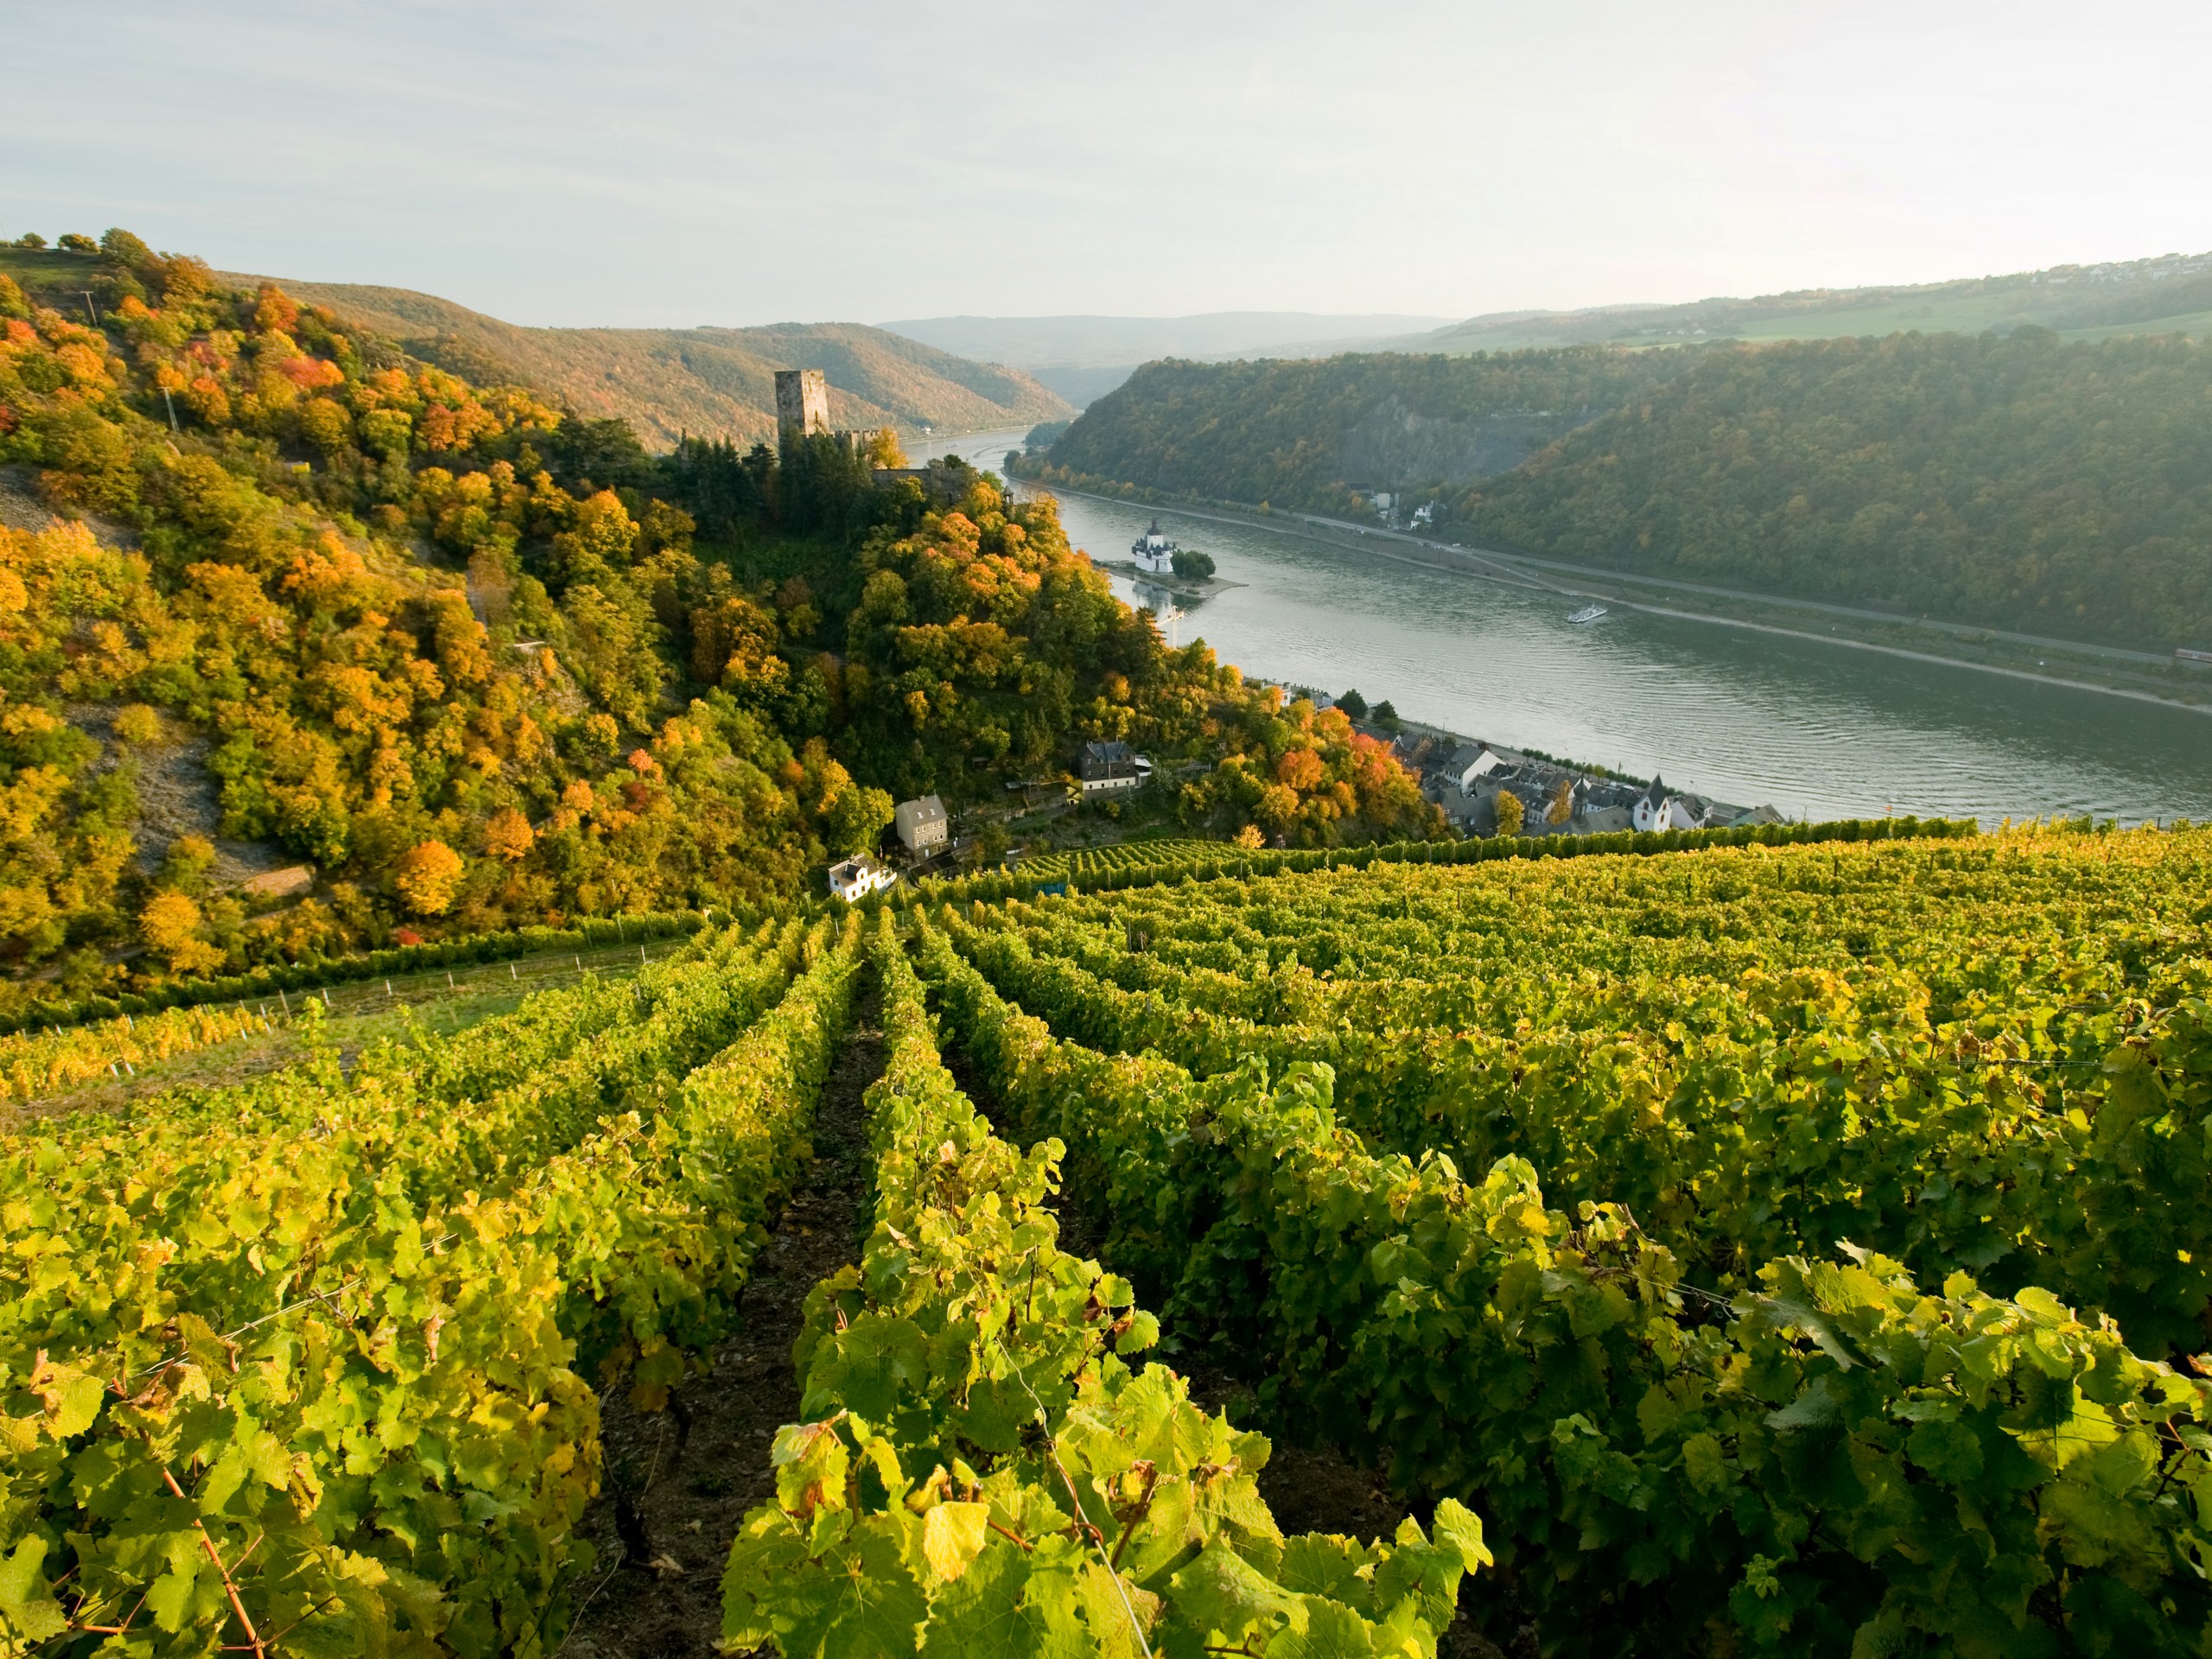 Expansive vineyars along the Moselle River